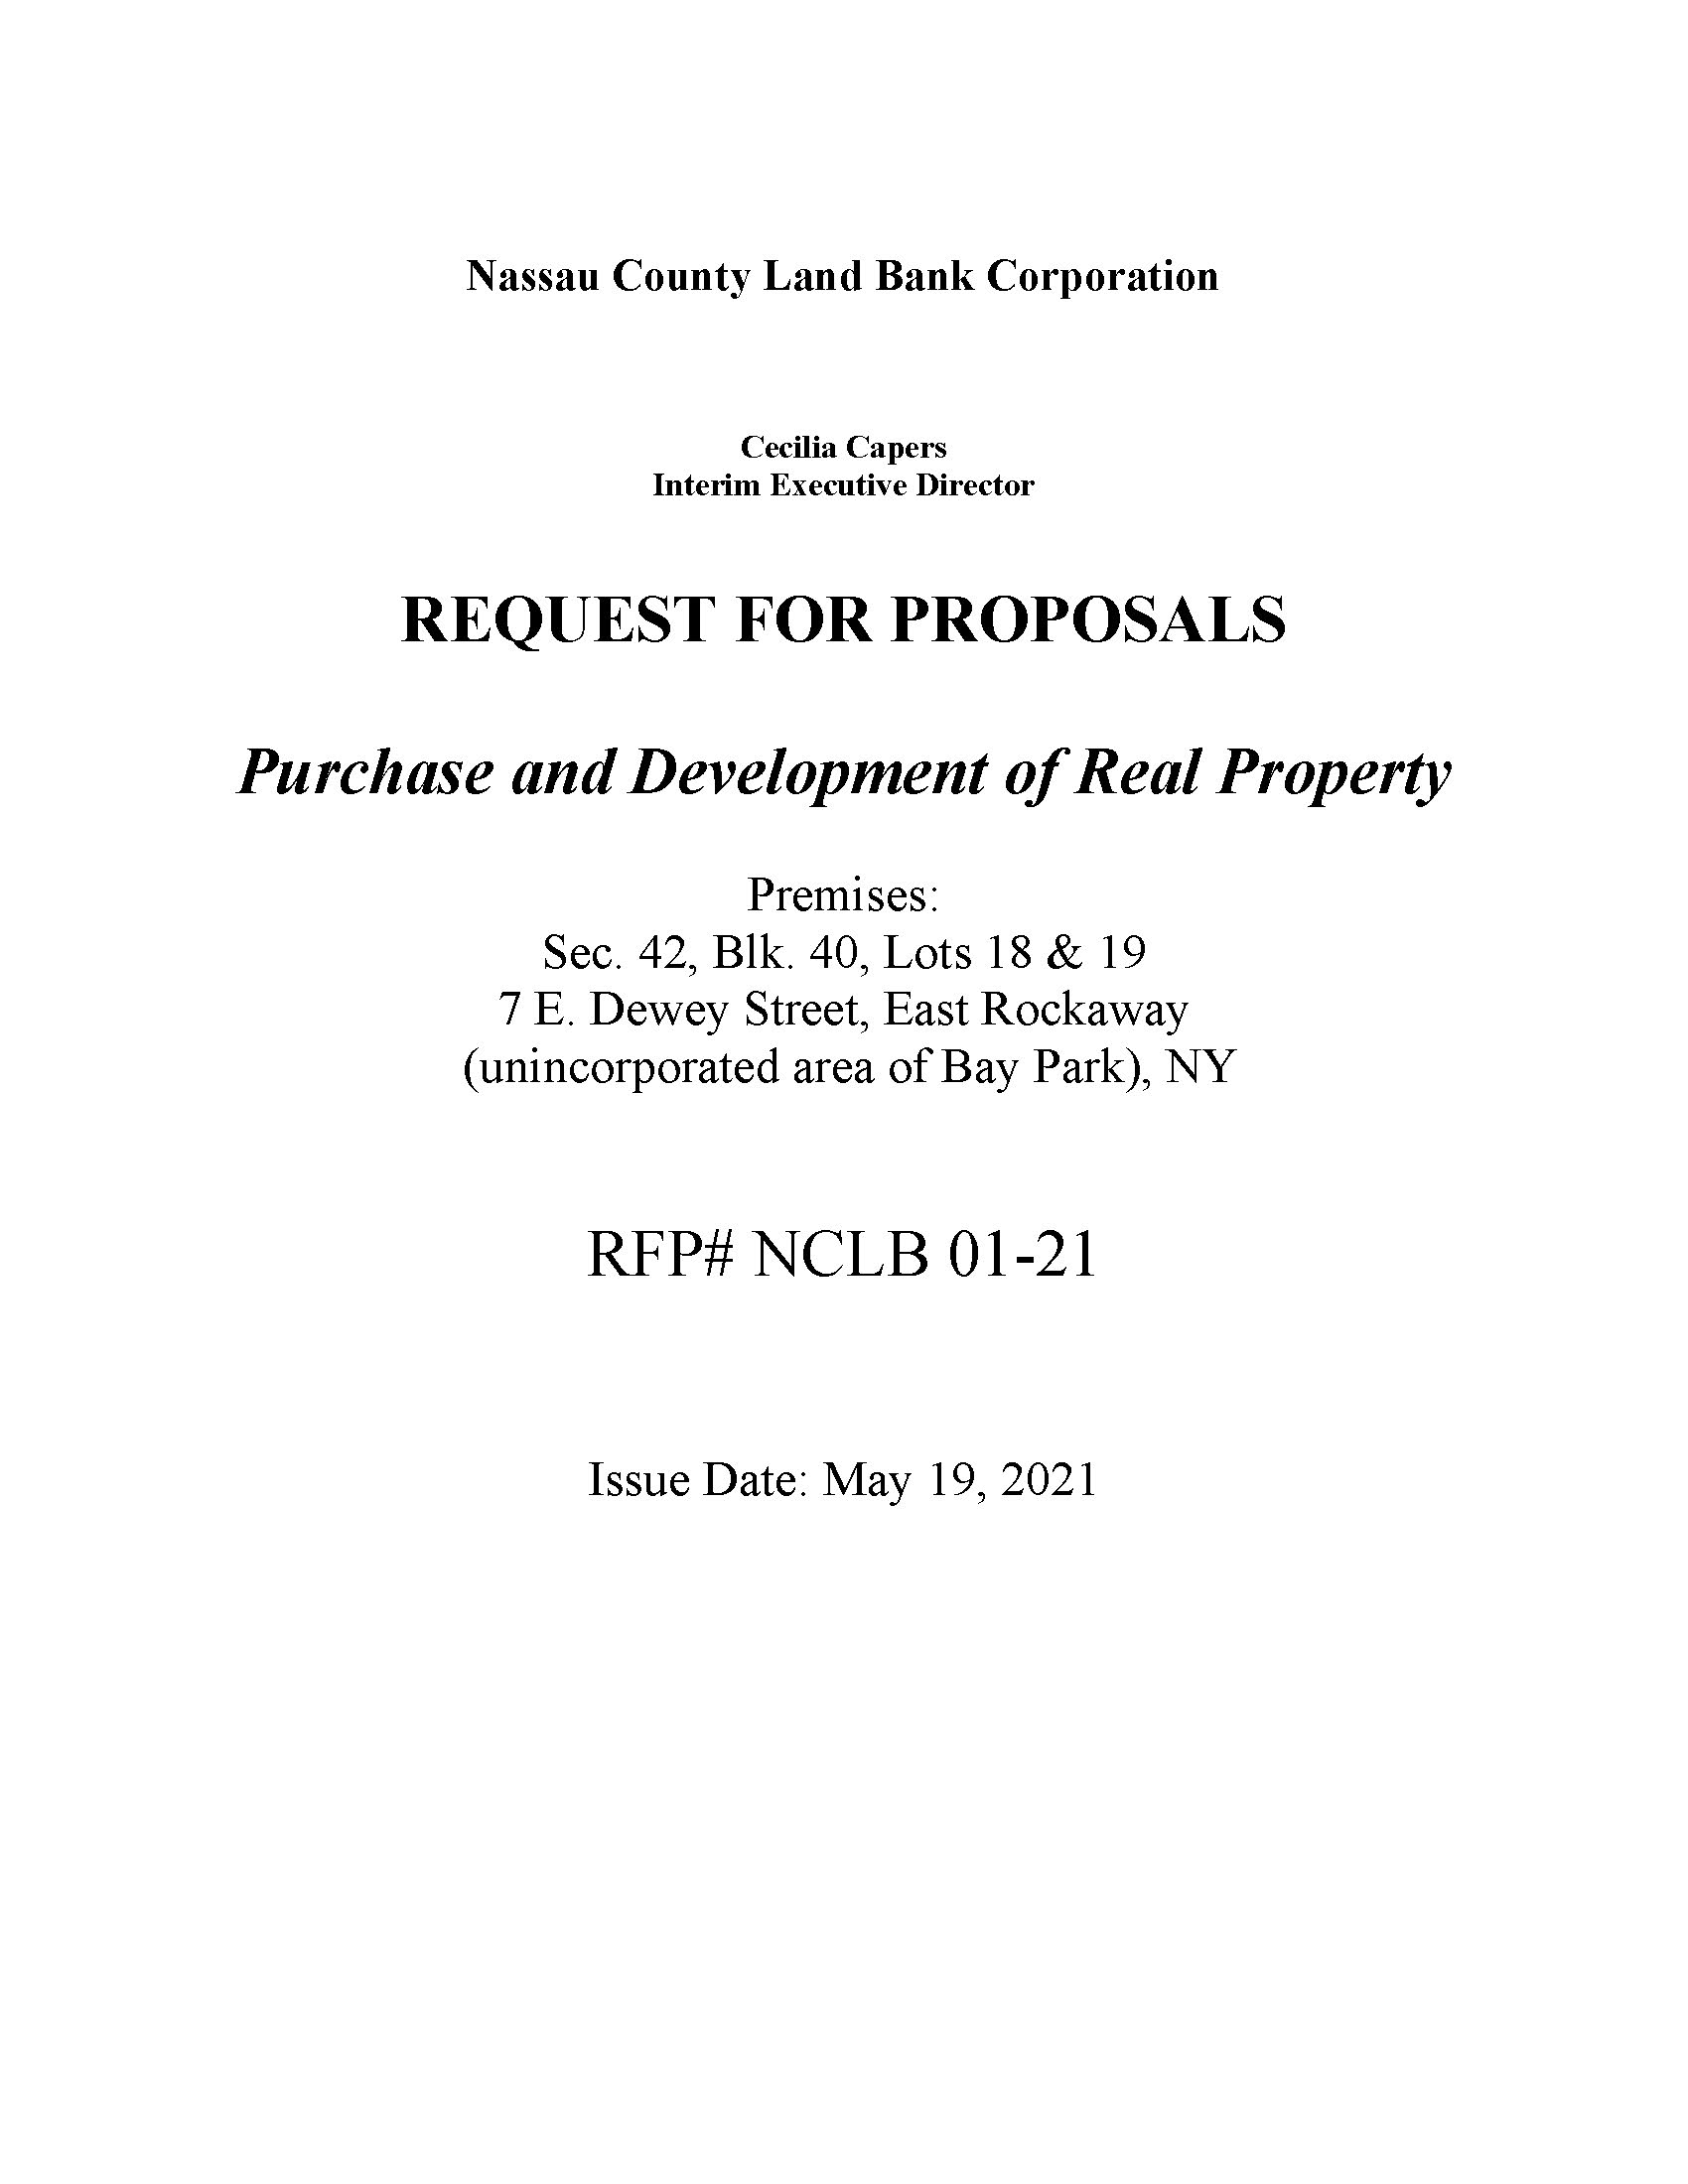 RFP for Purchase and Development of Real Property – Click here to redirect to the full document. Opens in new window